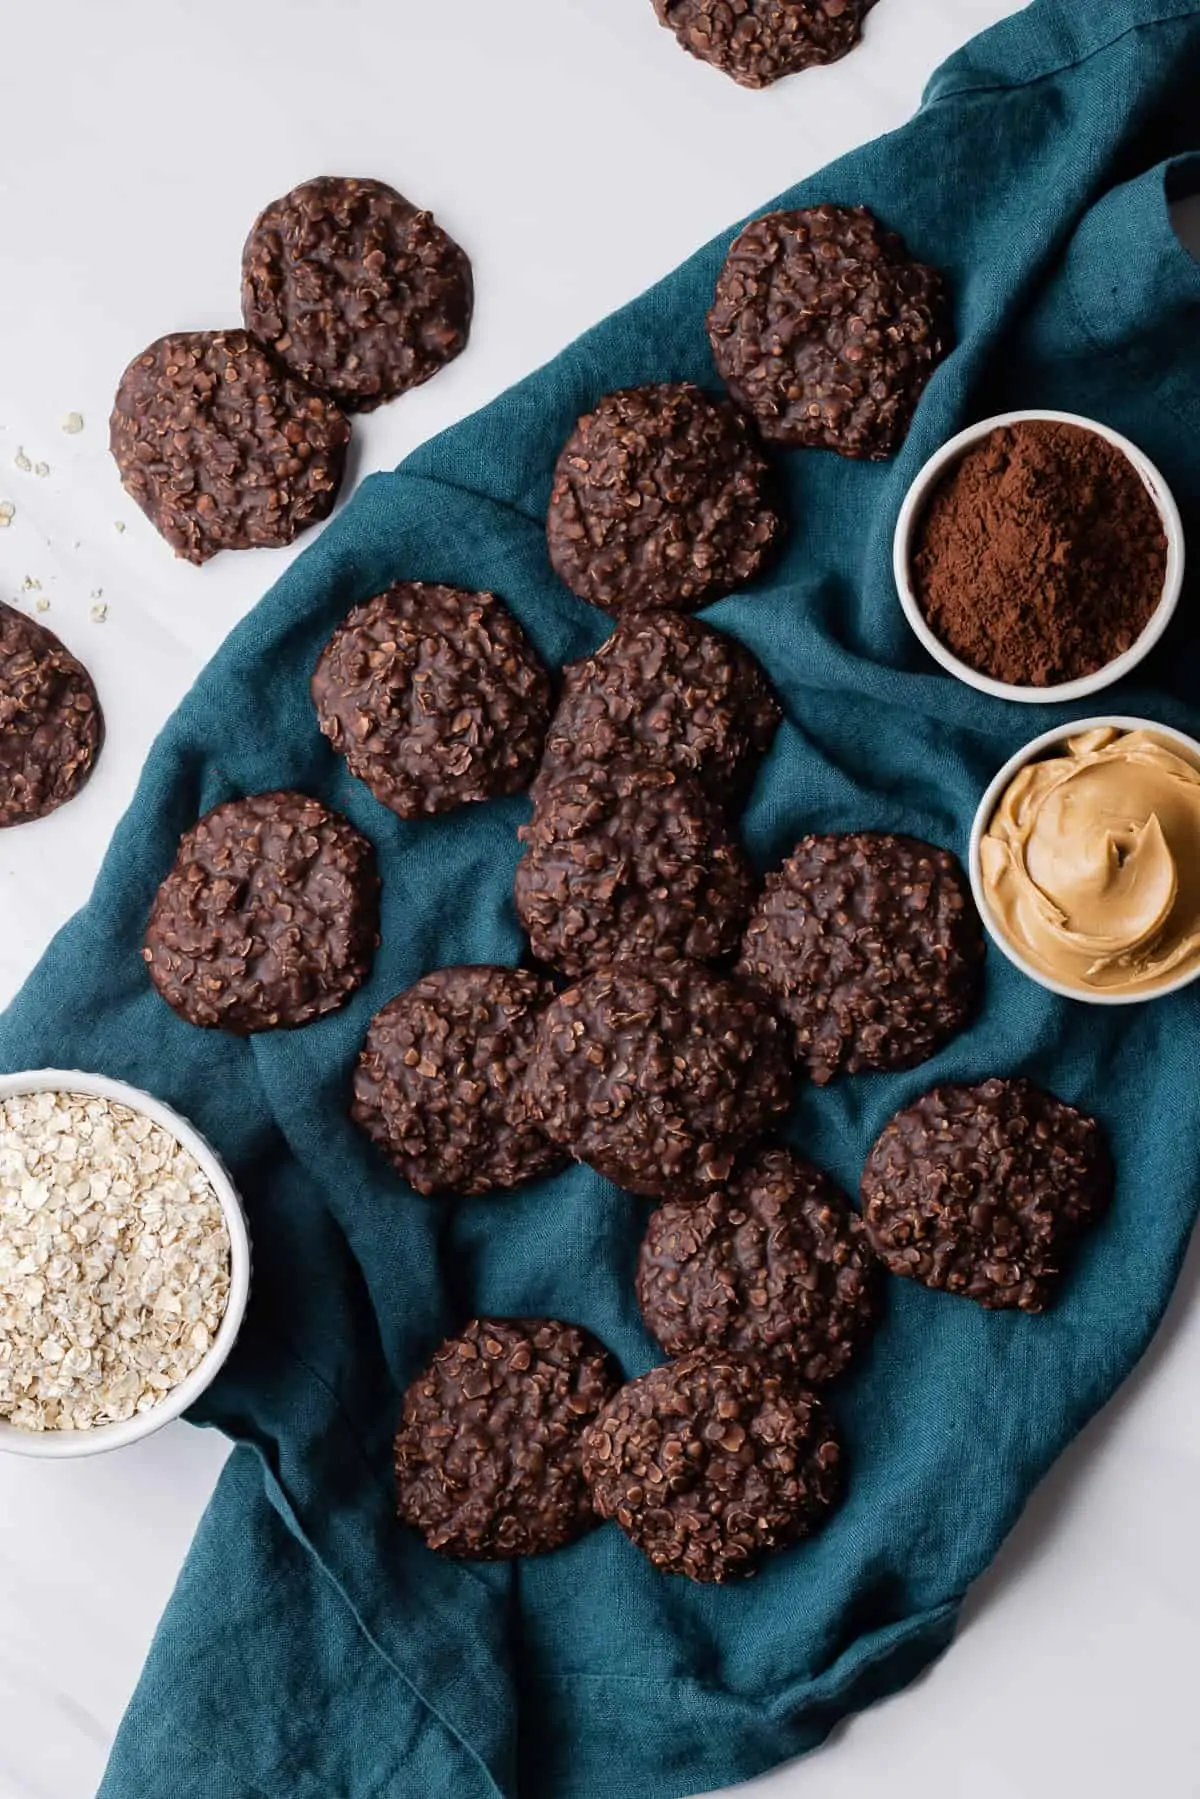 Classic no bake cookies with peanut butter, chocolate, and oats.